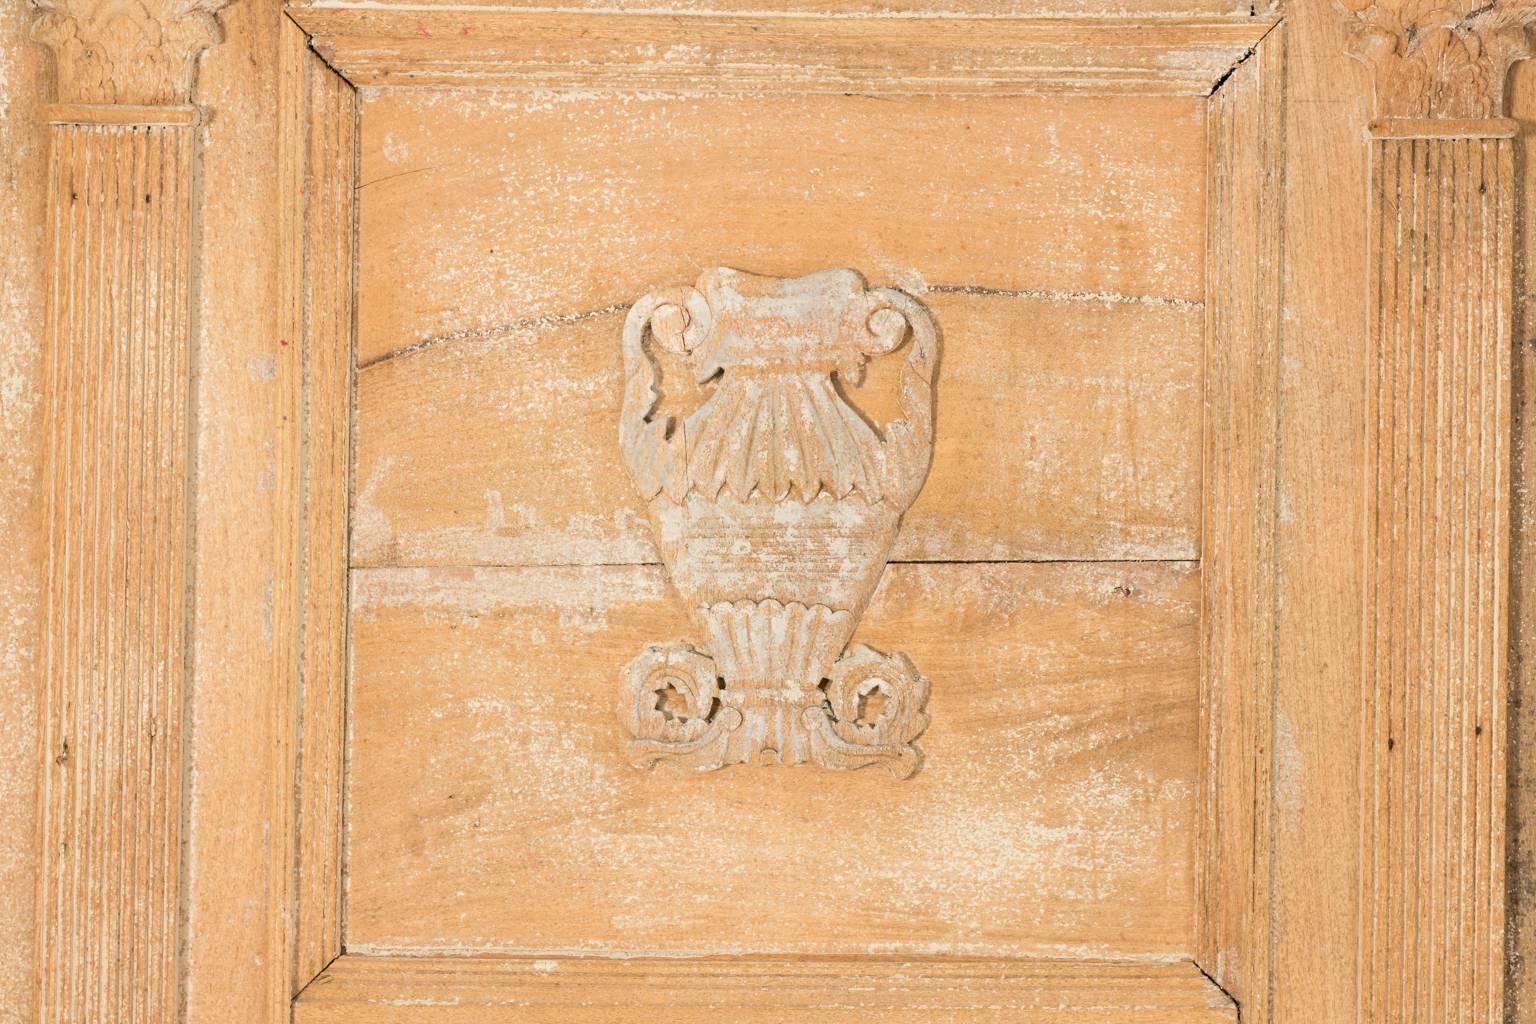 Wonderful grand scale antique wooden trumeau mirror. The aged white washed wood has a mellowed patina and is decorated with carved Corinthian columns finished on a plinth base, and a carved urn detail in the center as a lovely focal point.